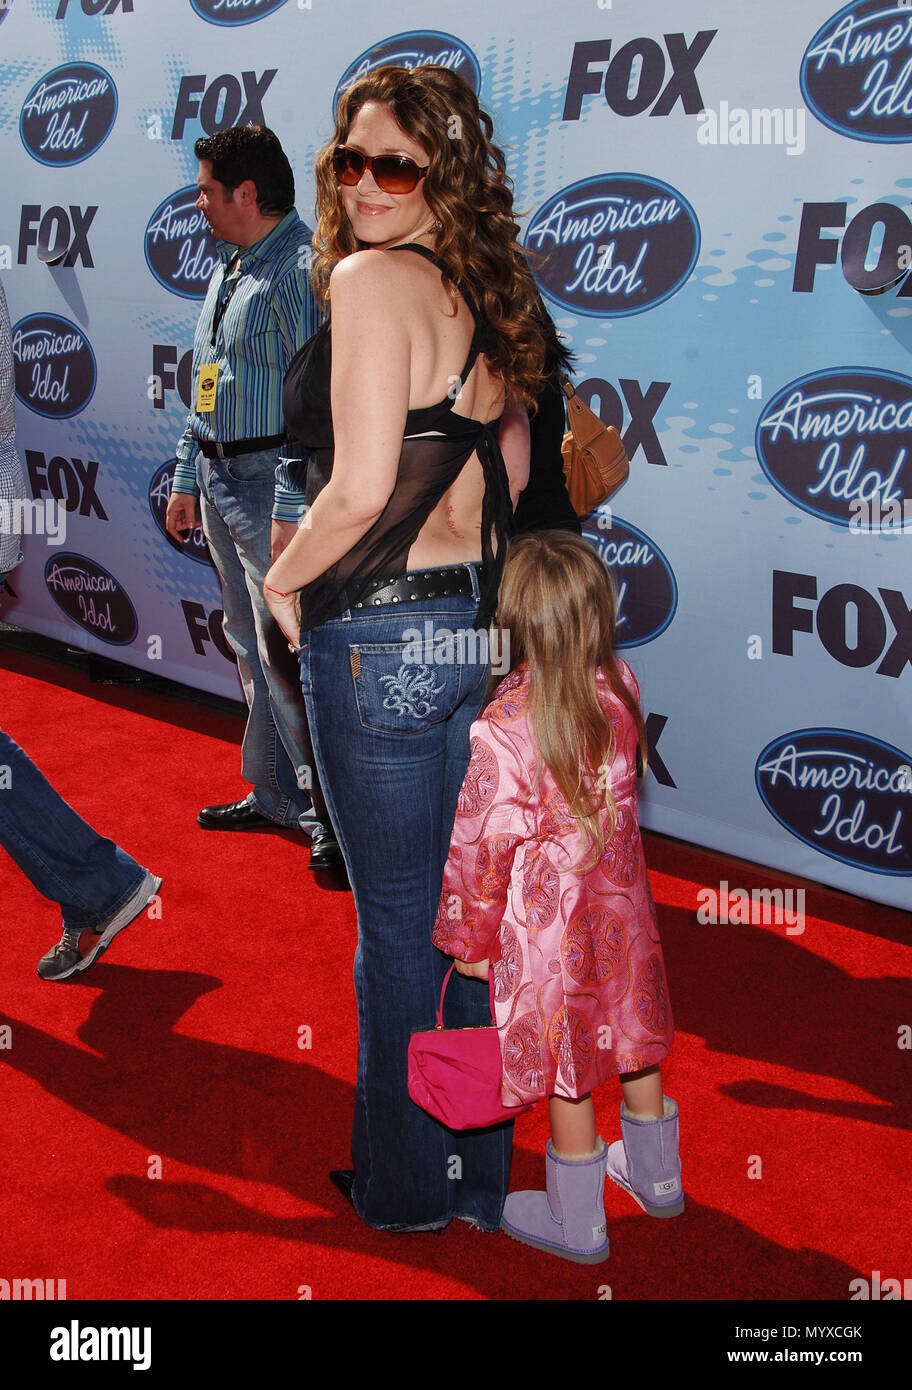 Joely Fisher and daughter arriving at the Kodak Theatre In Los Angeles. May 24, 2006.FisherJoely daughter  Event in Hollywood Life - California, Red Carpet Event, USA, Film Industry, Celebrities, Photography, Bestof, Arts Culture and Entertainment, Celebrities fashion, Best of, Hollywood Life, Event in Hollywood Life - California, Red Carpet and backstage, Music celebrities, Topix, Couple, family ( husband and wife ) and kids- Children, brothers and sisters inquiry tsuni@Gamma-USA.com, Credit Tsuni / USA, 2006 to 2009 Stock Photo